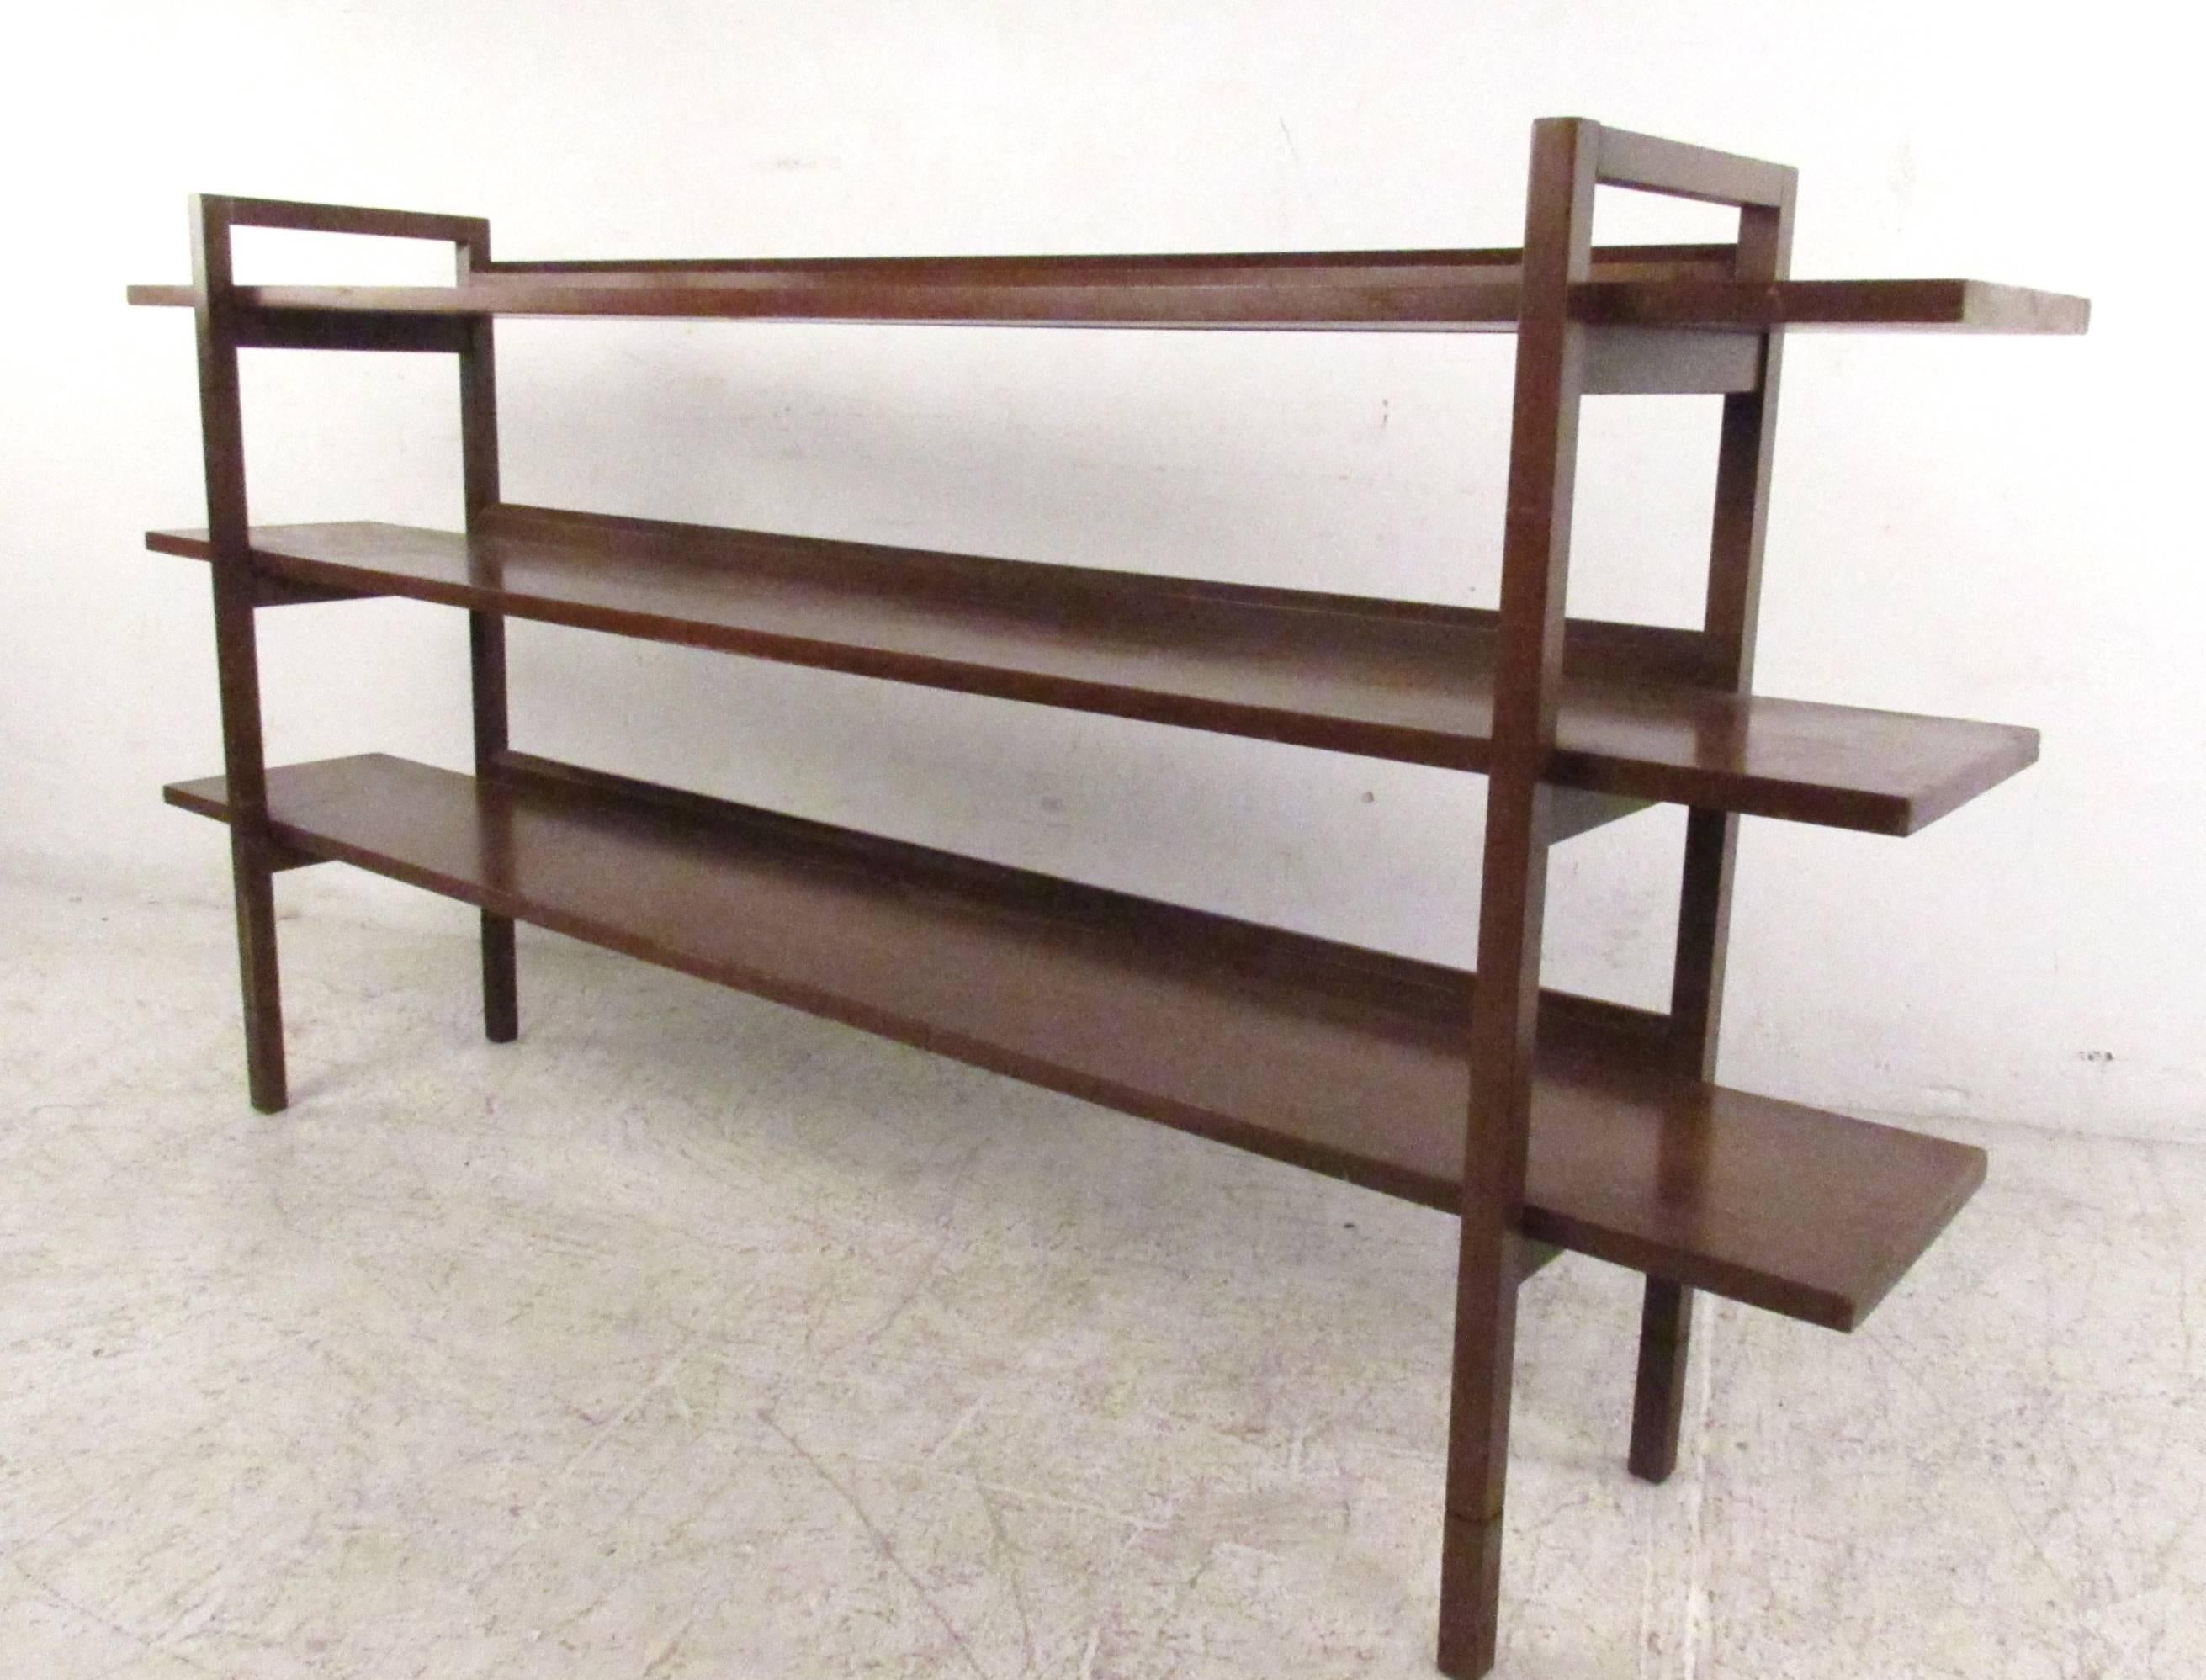 This unique Mid-Century bookshelf features three open back walnut shelves with a slight raised edge on the back. Minimalistic Mid-Century style make this a unique shelf perfect for books, kitsch, or shop display. Please confirm item location (NY or